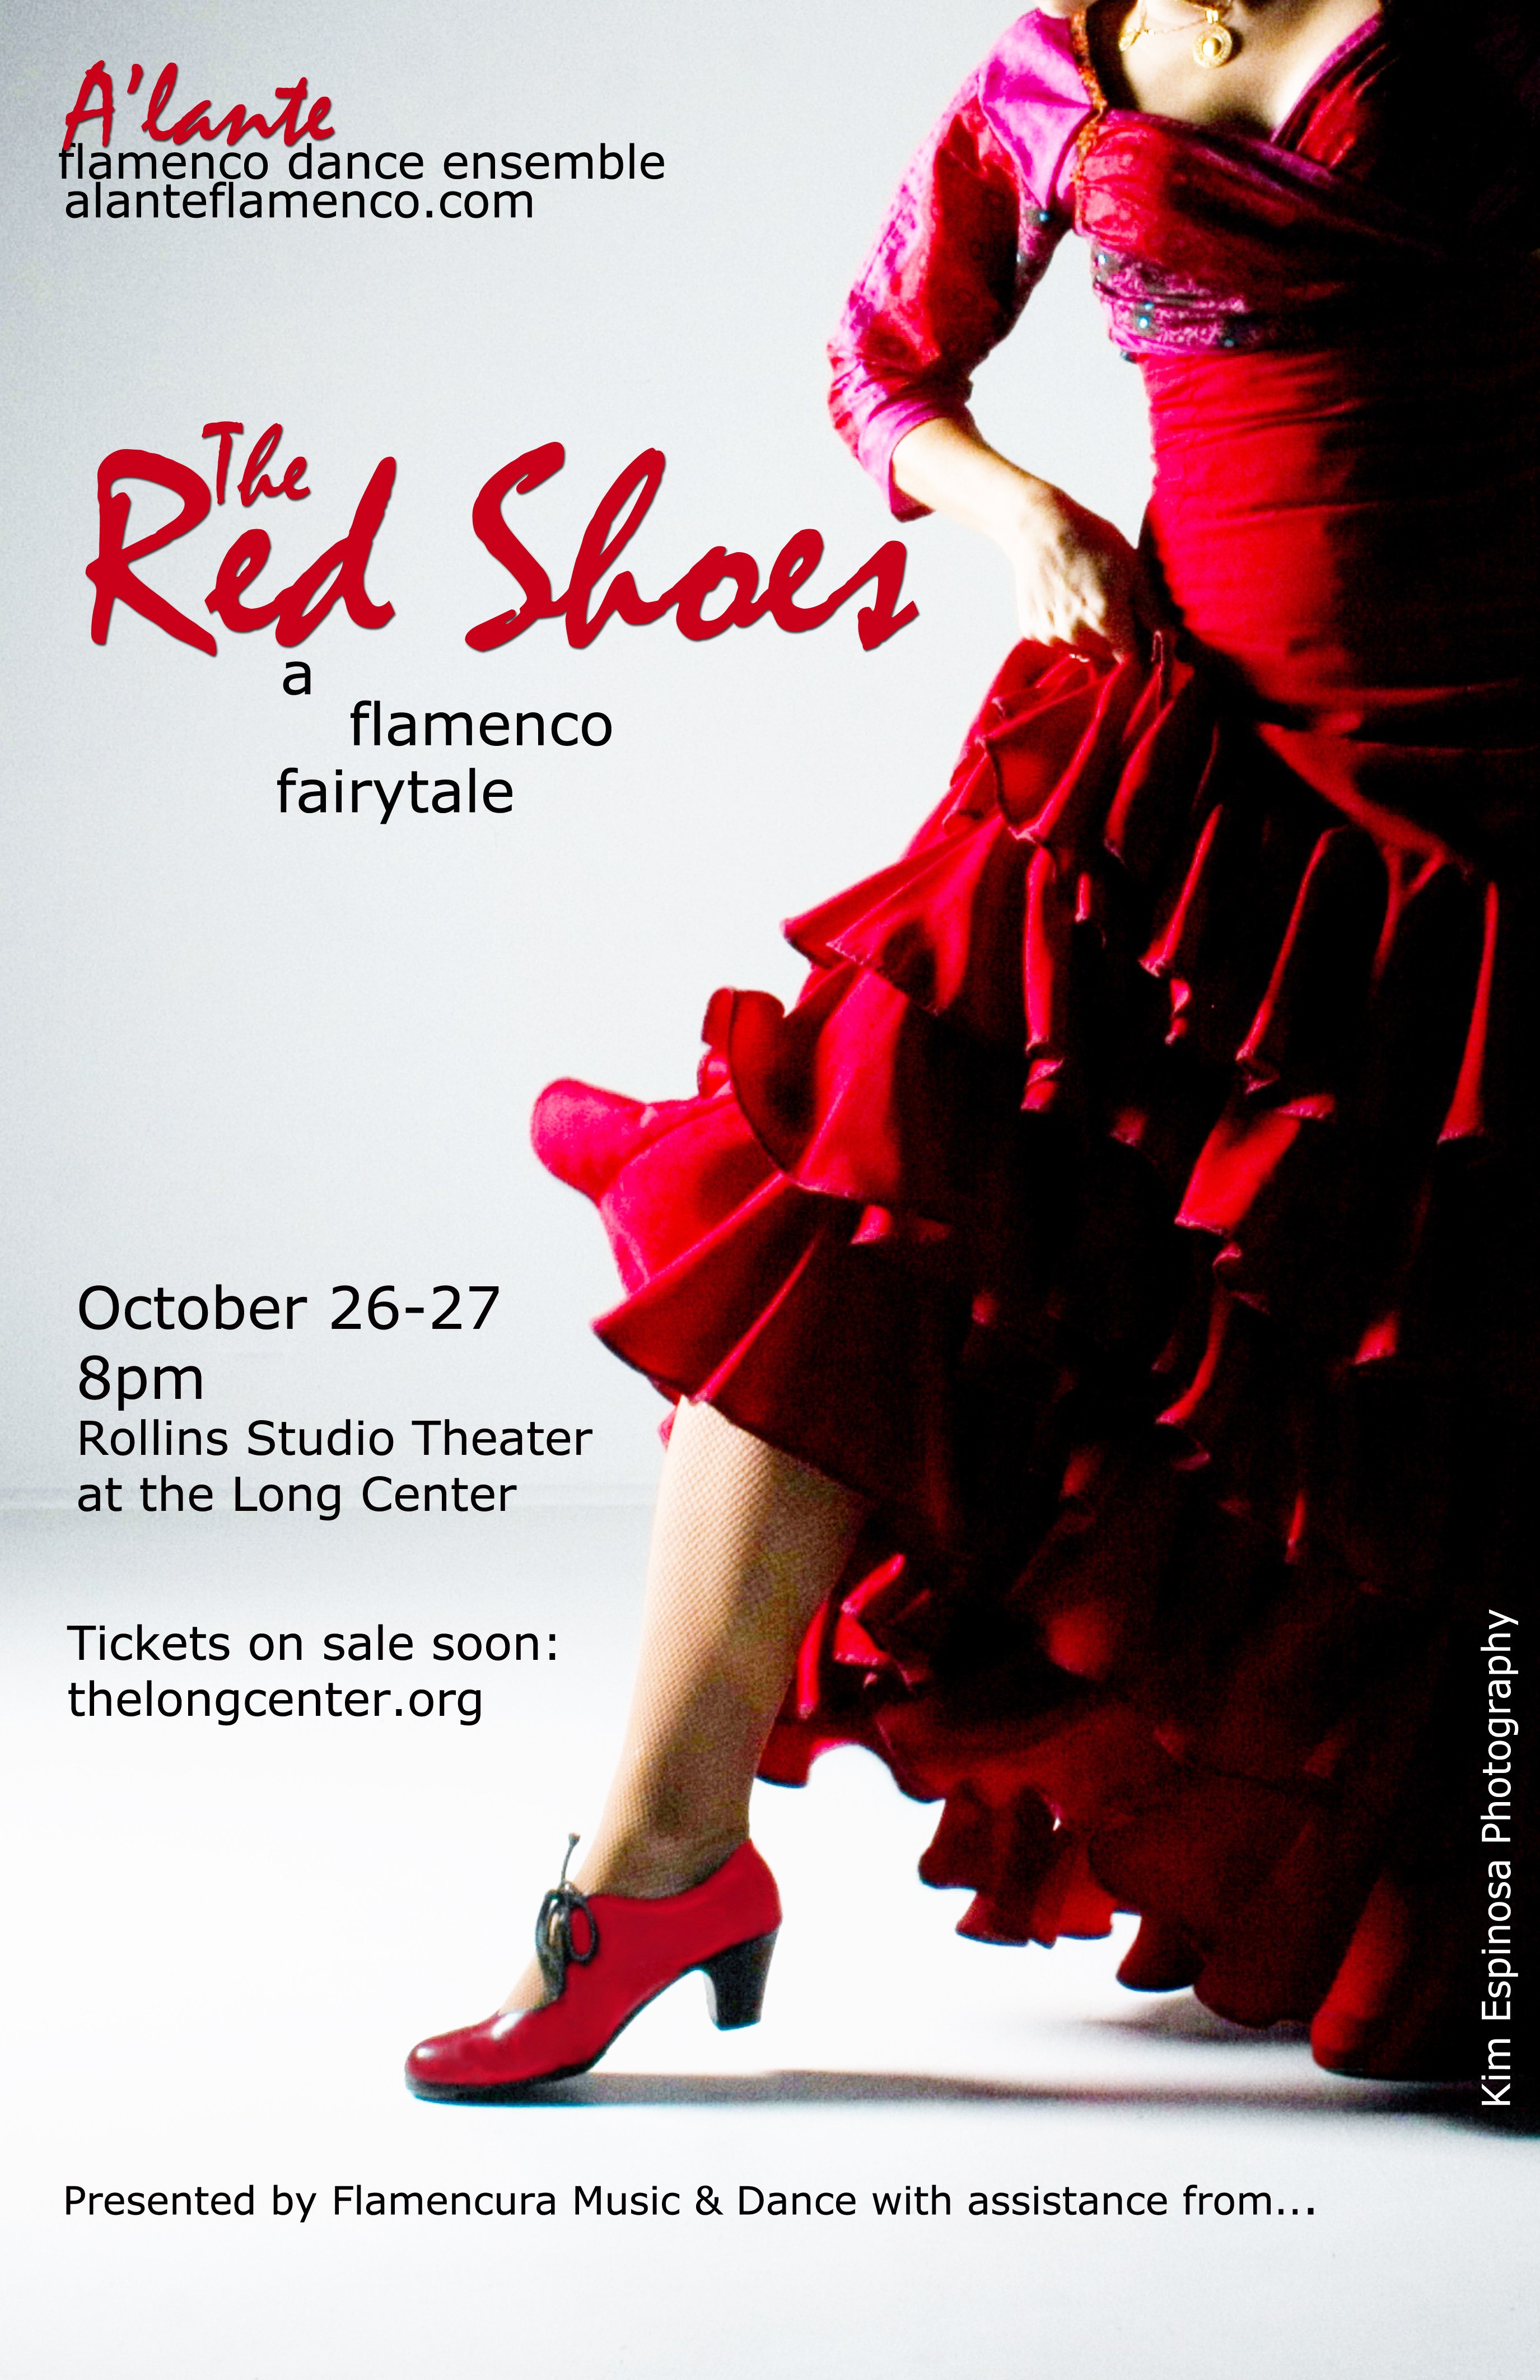 flamenco austin the red shoes at the long center by alante dance